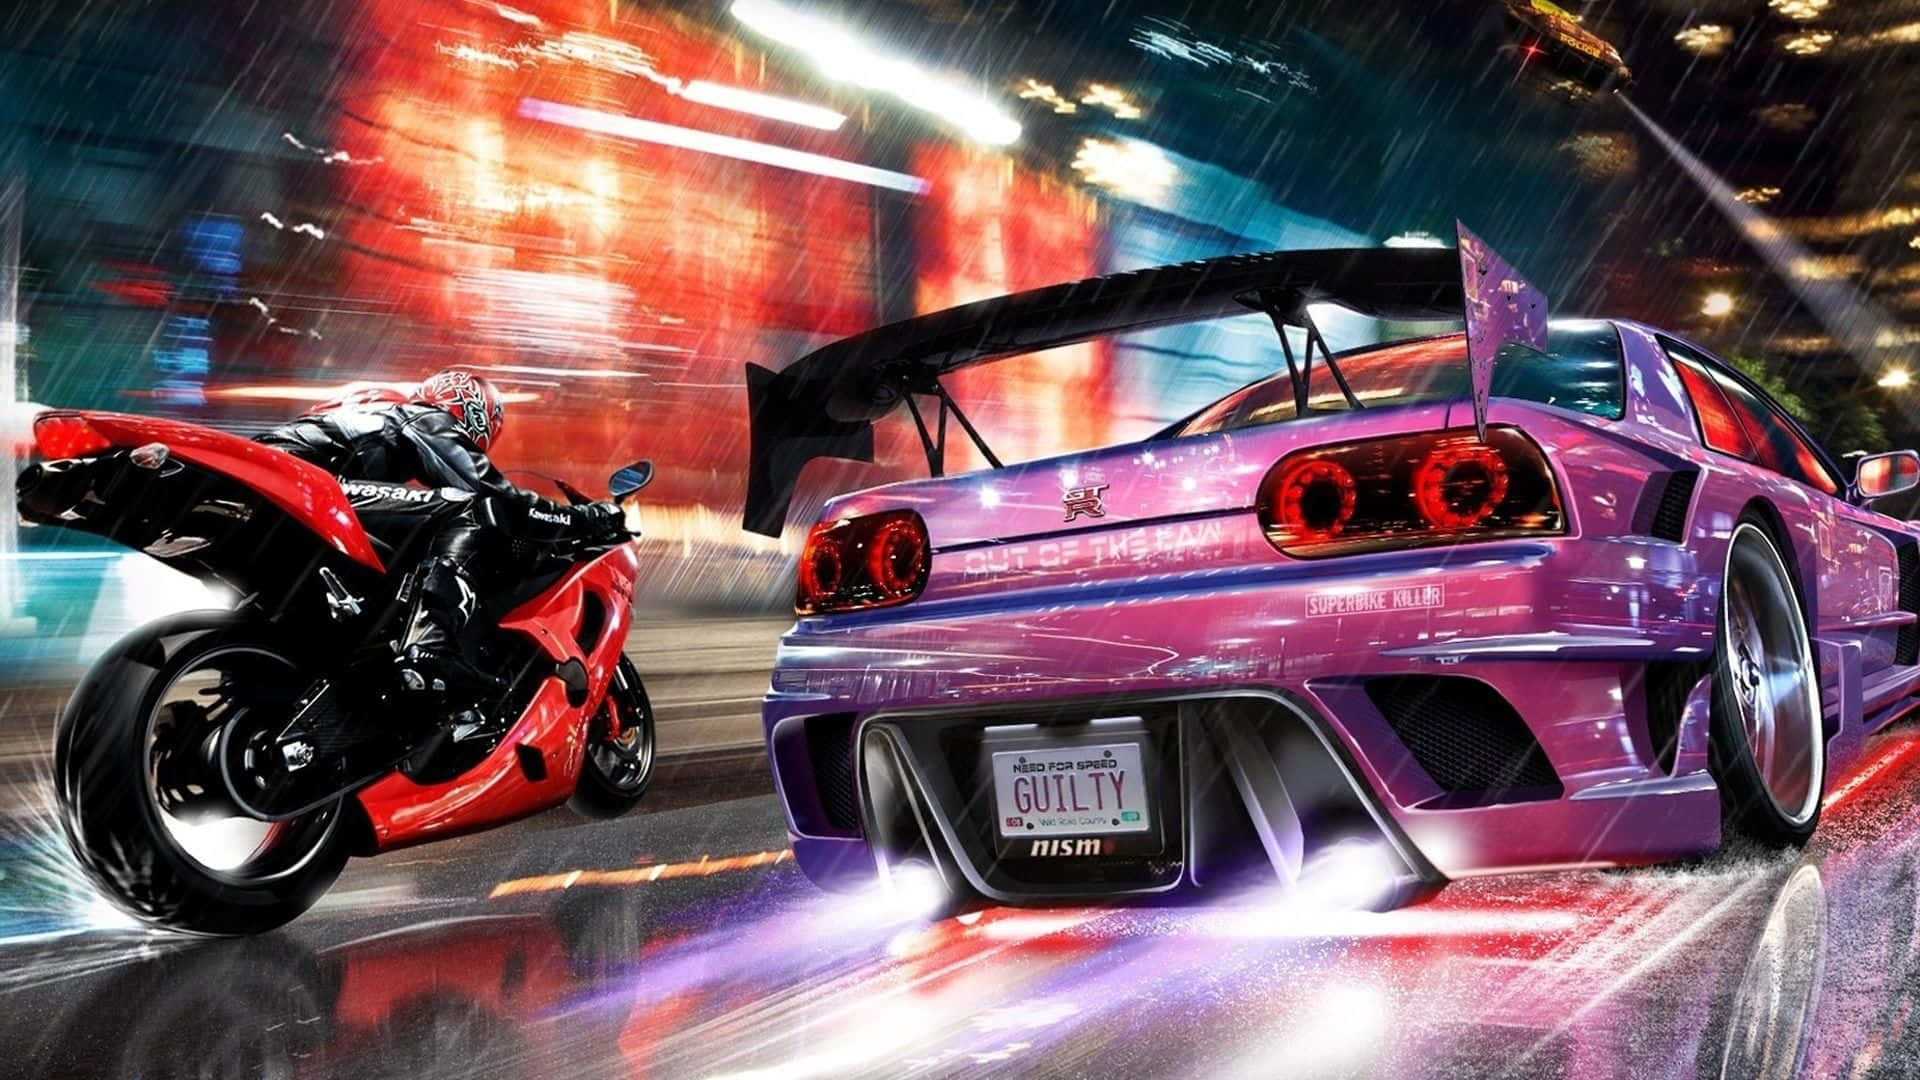 Stand Out From The Crowd With This Cool Nissan Skyline Wallpaper